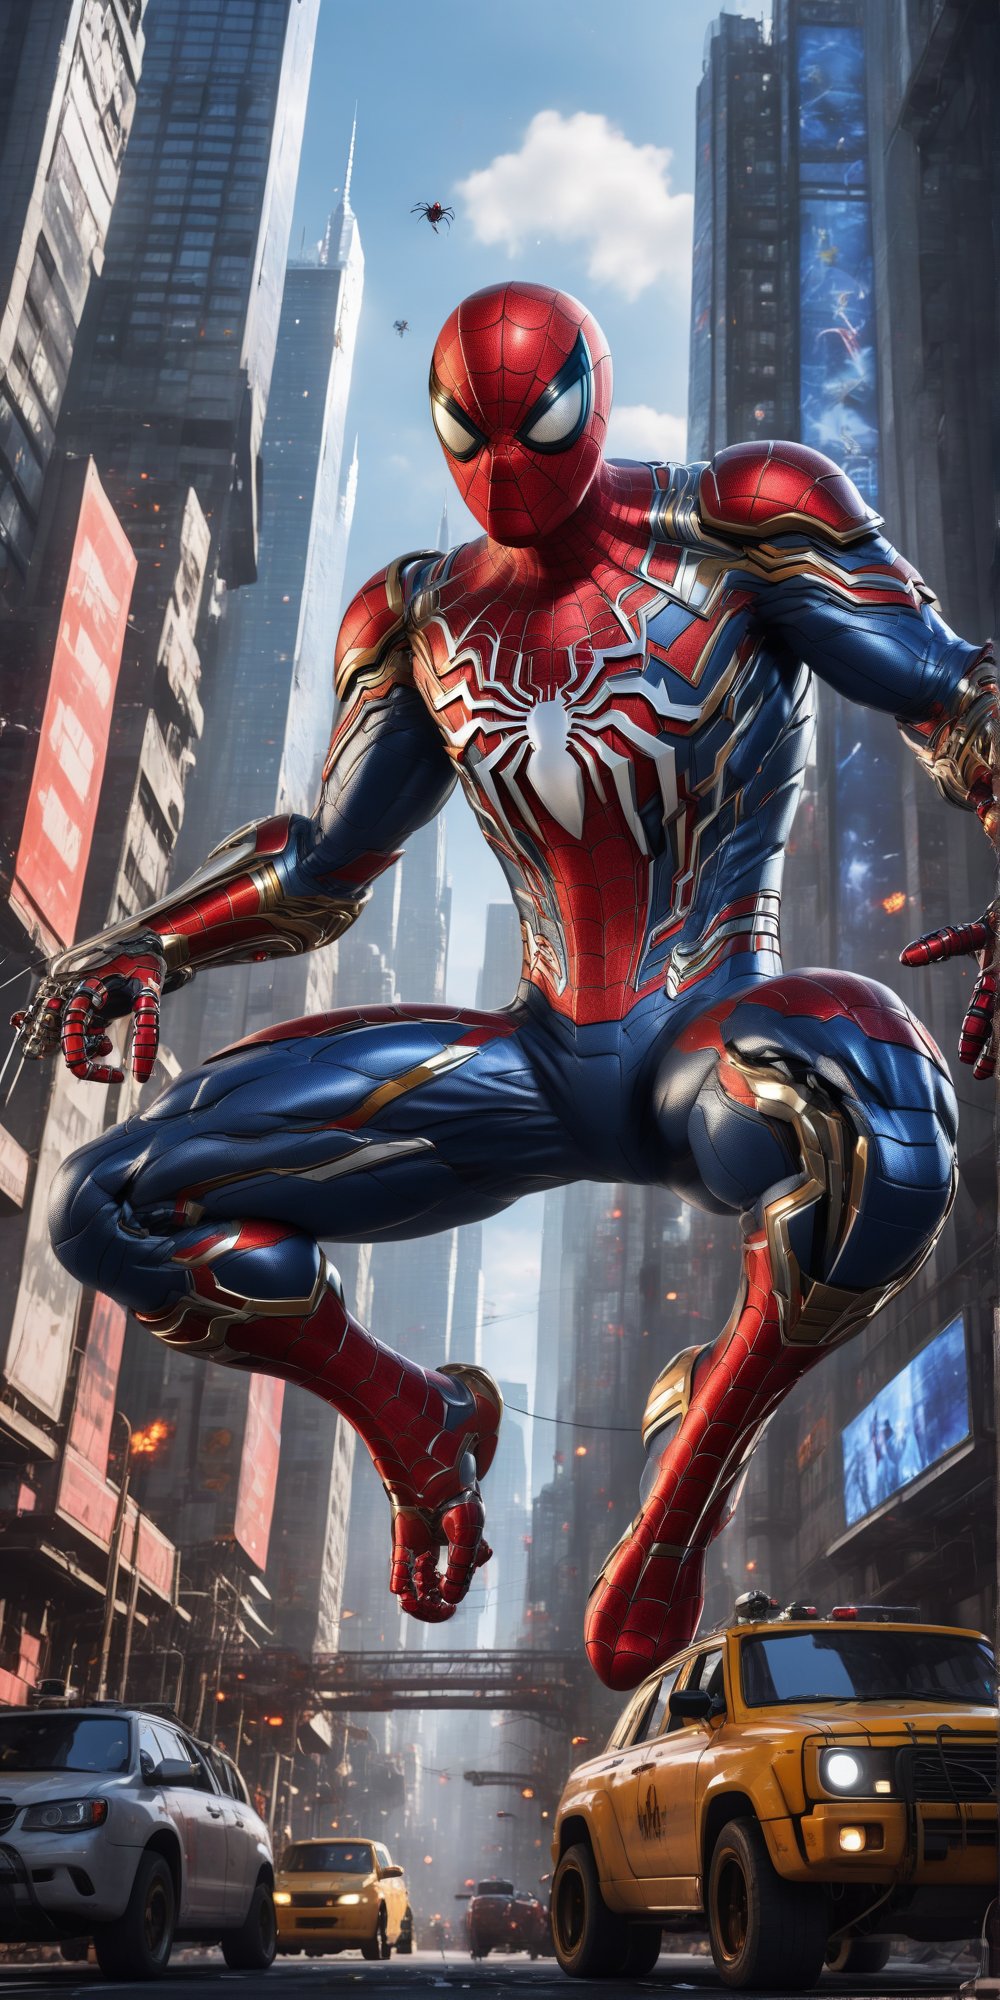 A sprawling metropolis serves as the backdrop for an intense battle scene. Angry Spiderman Mecha Robo Soldier stands tall, its blue armor glistening under cinematic lighting's warm glow. The anthropomorphic figure holds a golden staff in one hand and brandishes futuristic weapons with the other, ready to take down the enemy. Red lighting accents the suit's metallic sheen, as if infused with fiery determination. Reflection mapping creates an unparalleled level of realism, making this 32K UHD image feel like a window into a hyperdetailed world.